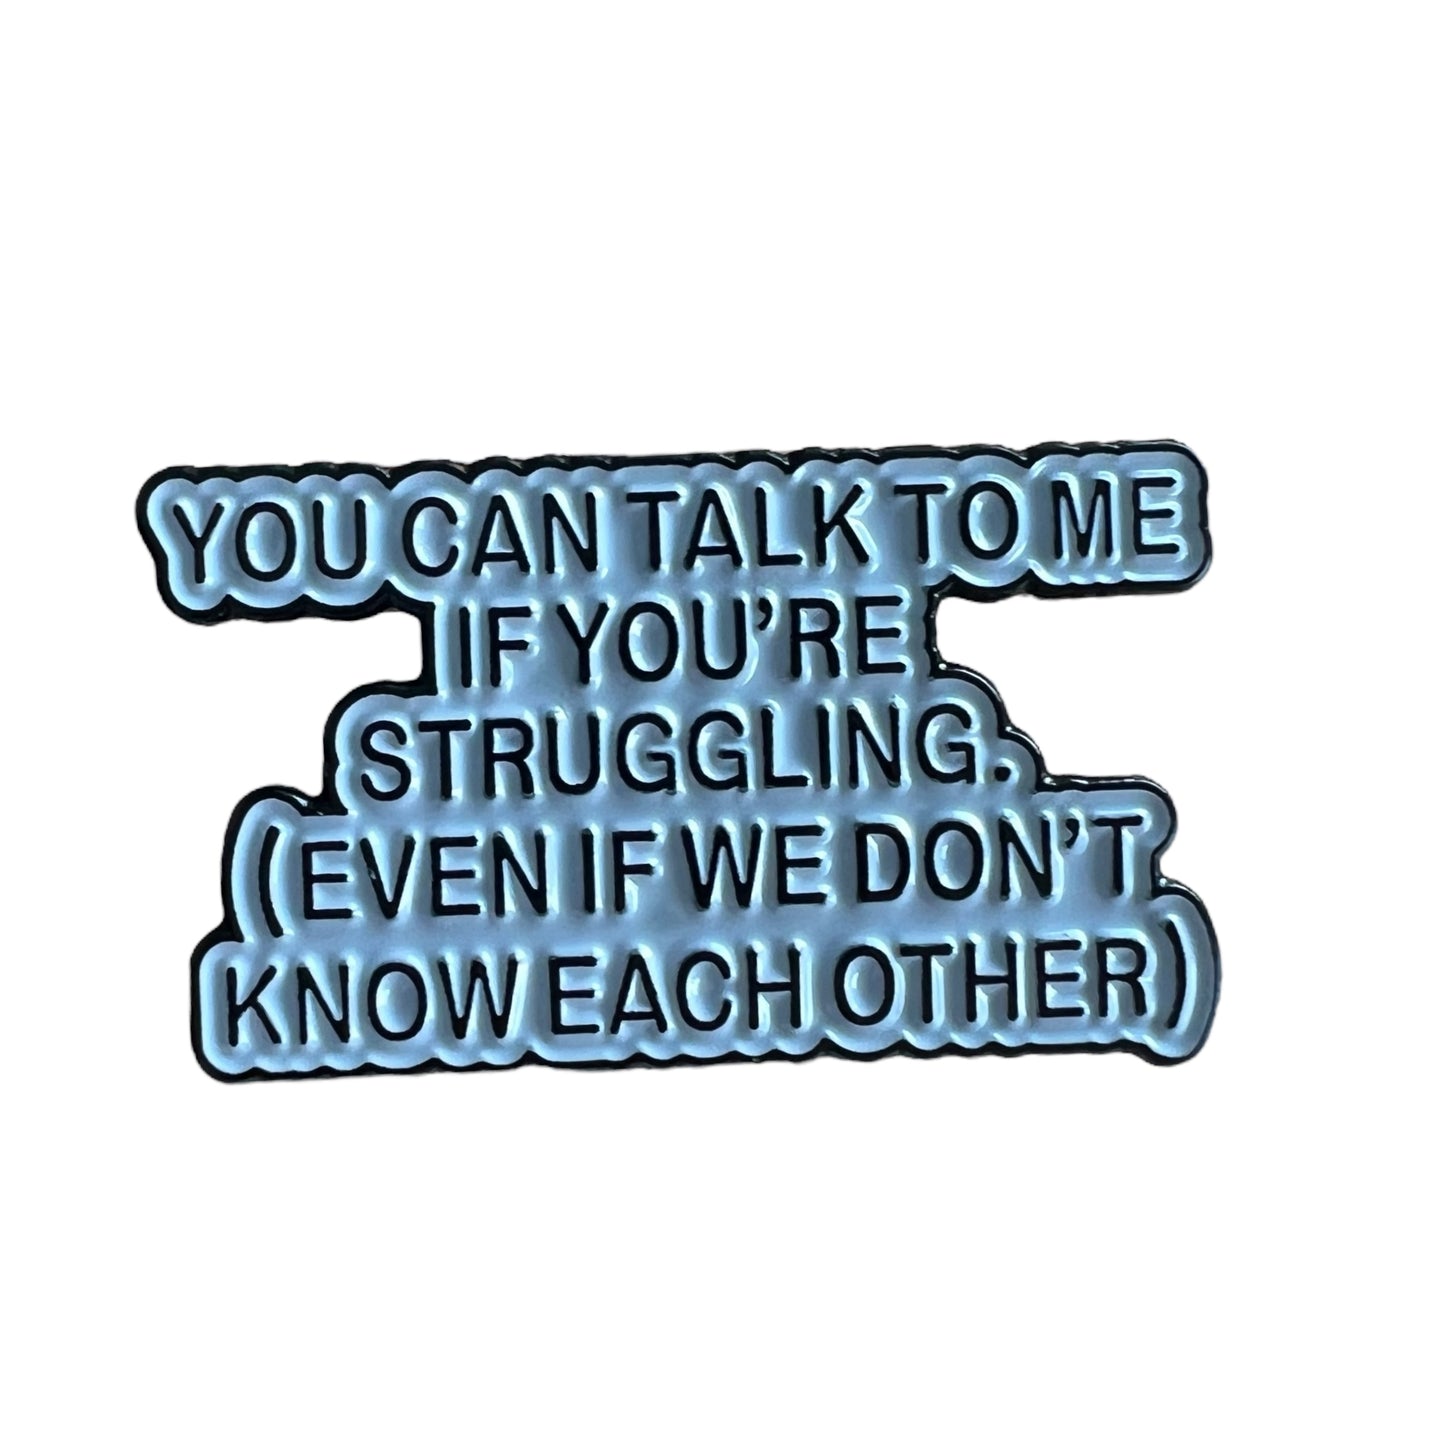 Pin — "You can talk to me if you’re struggling (even if we don’t know each other).”